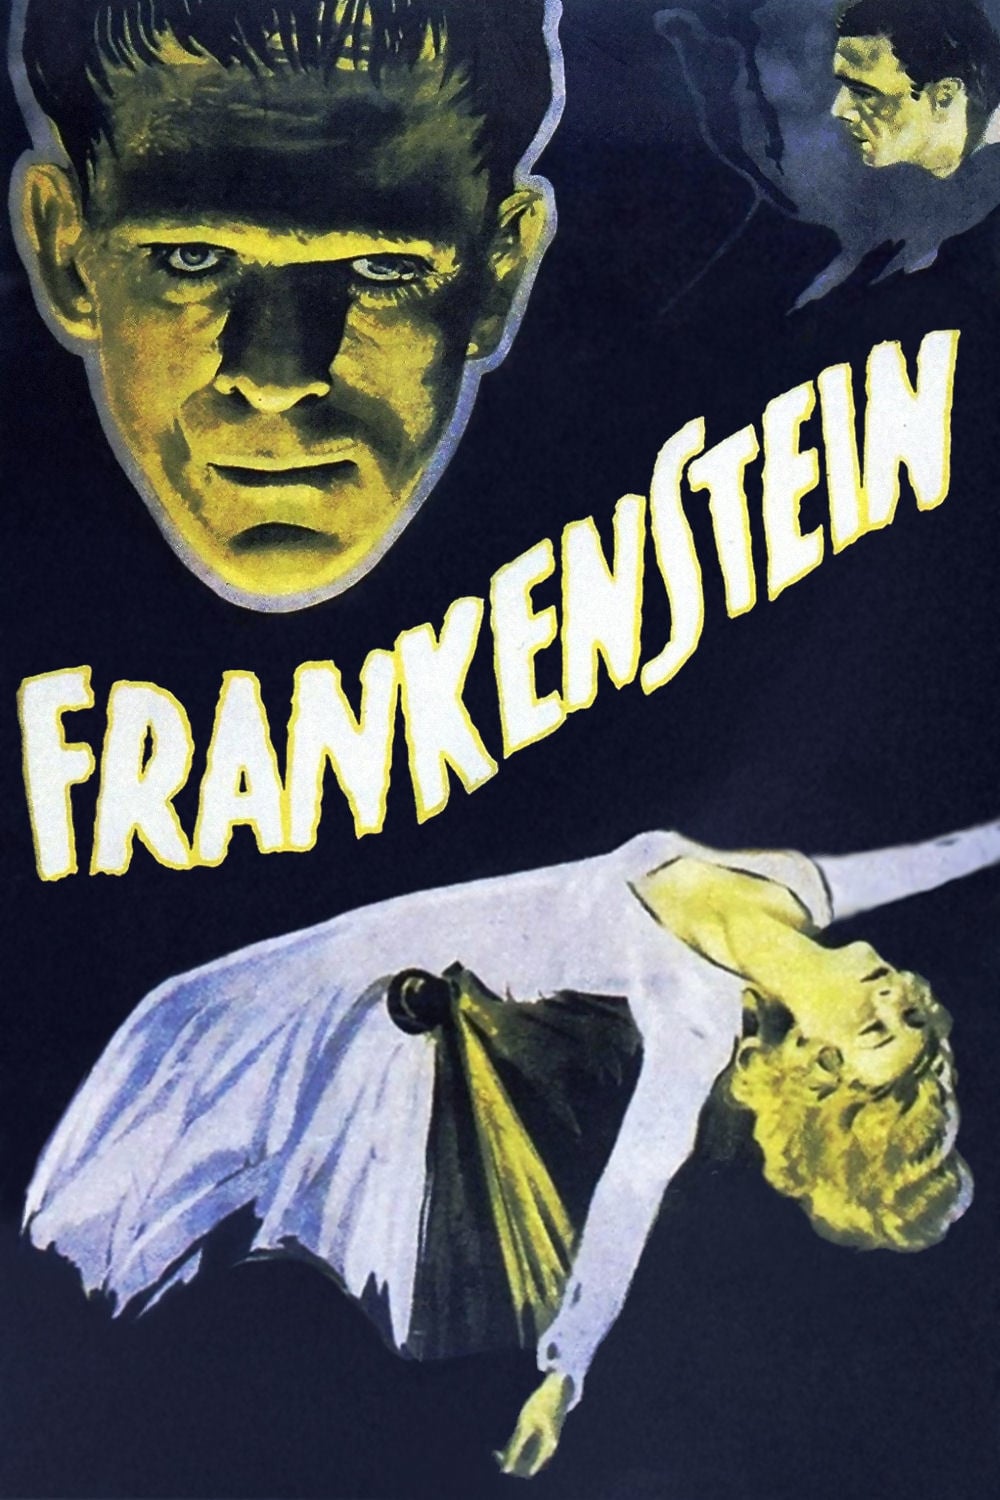 Frankenstein (1931) Movie Poster High Quality Glossy Paper A1 A2 A3 A4 A3 Framed or Unframed!!!